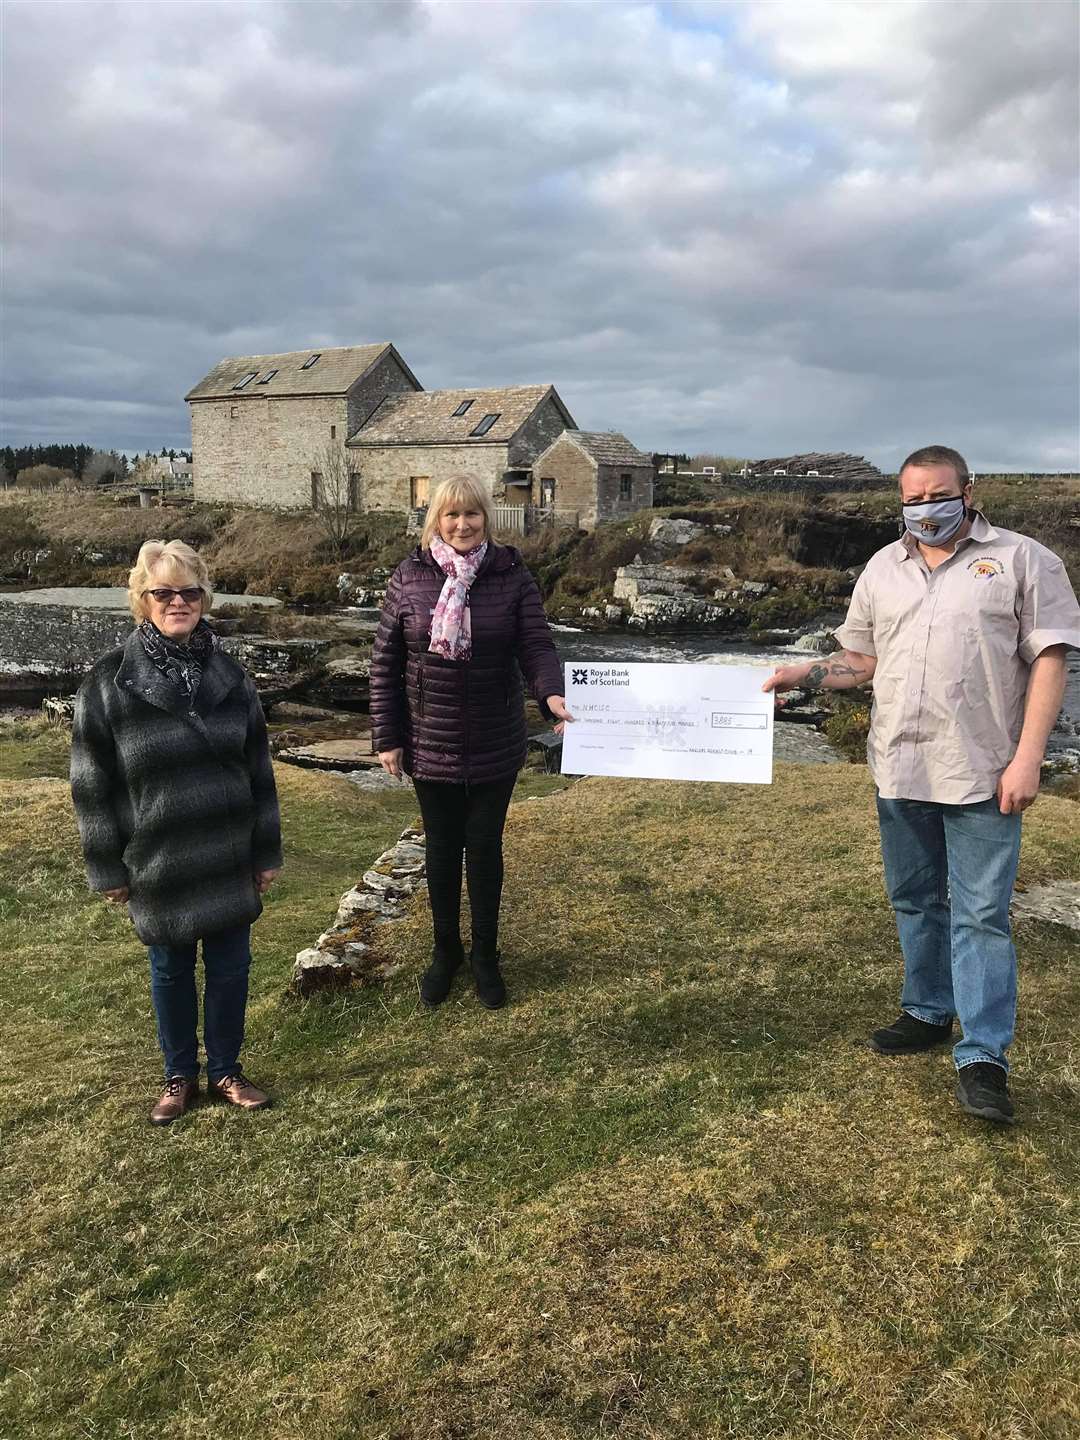 The cheque for £3885 was presented to Linda Sutherland (centre) and Jean Dunnet of the North Highland Cancer Information and Support Centre by Jamie McCarthy, of Halkirk, on behalf of the anglers from Northern Ireland.